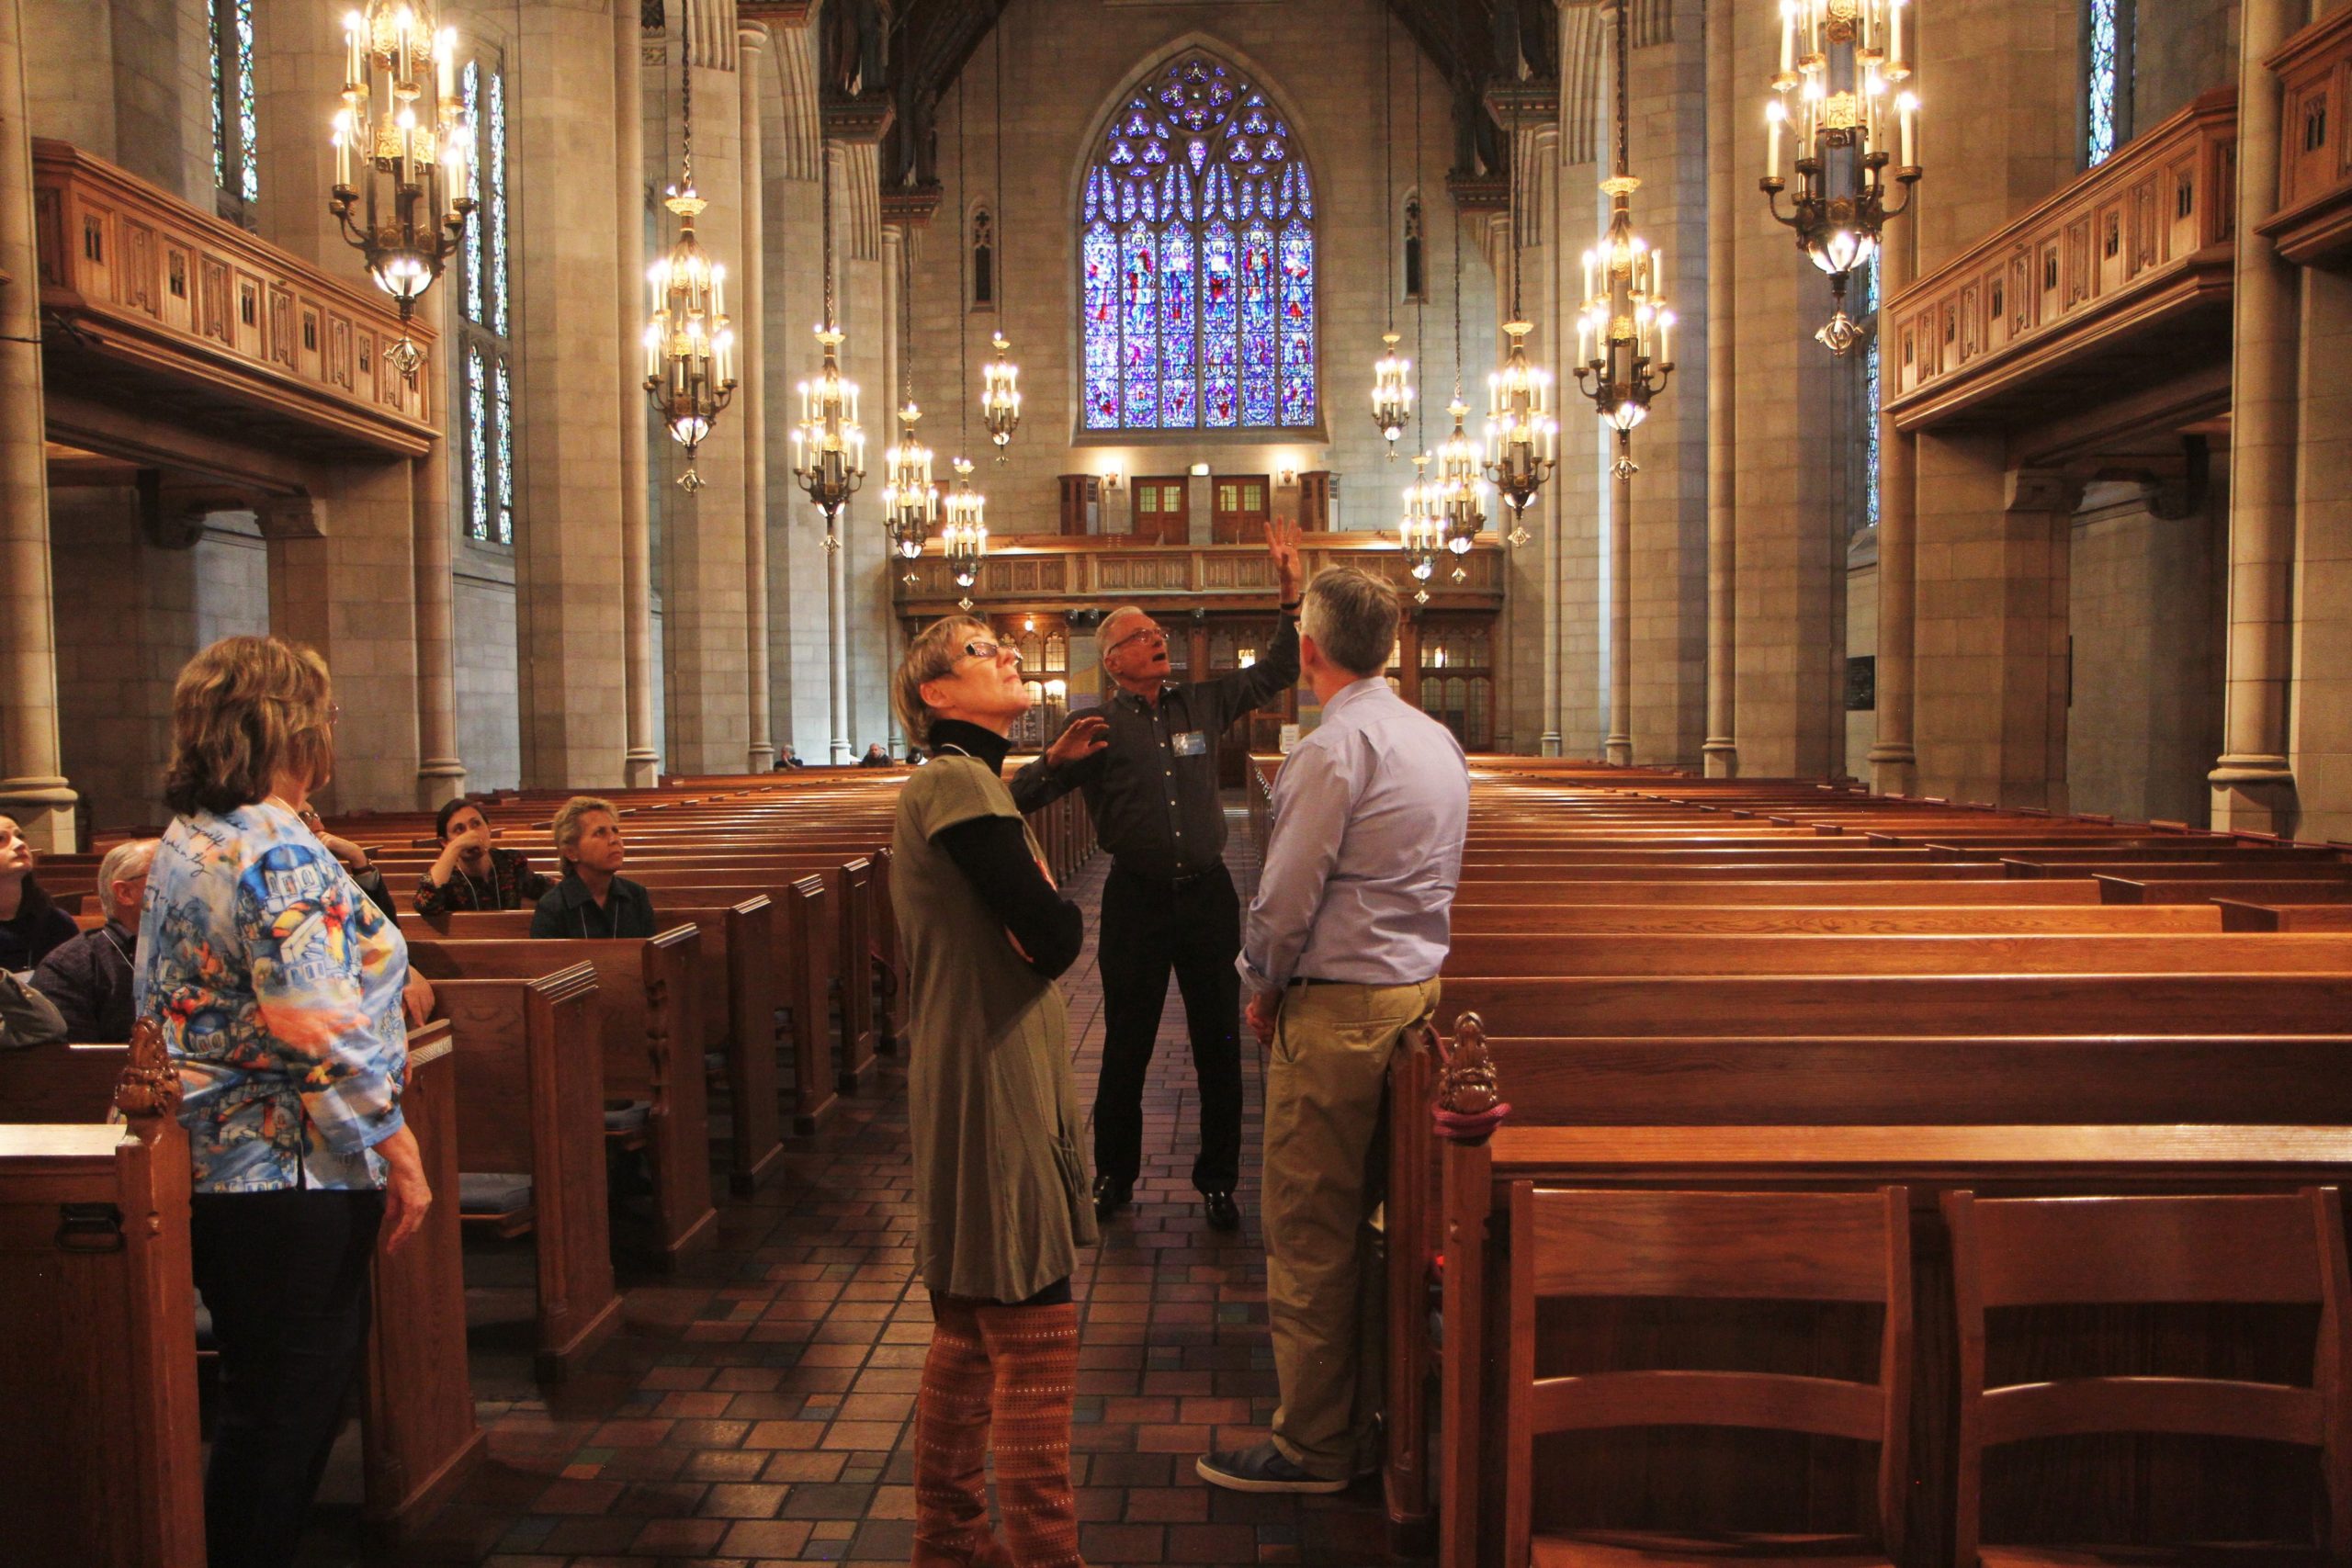 Congregational training using historic sacred spaces for community-wide programming